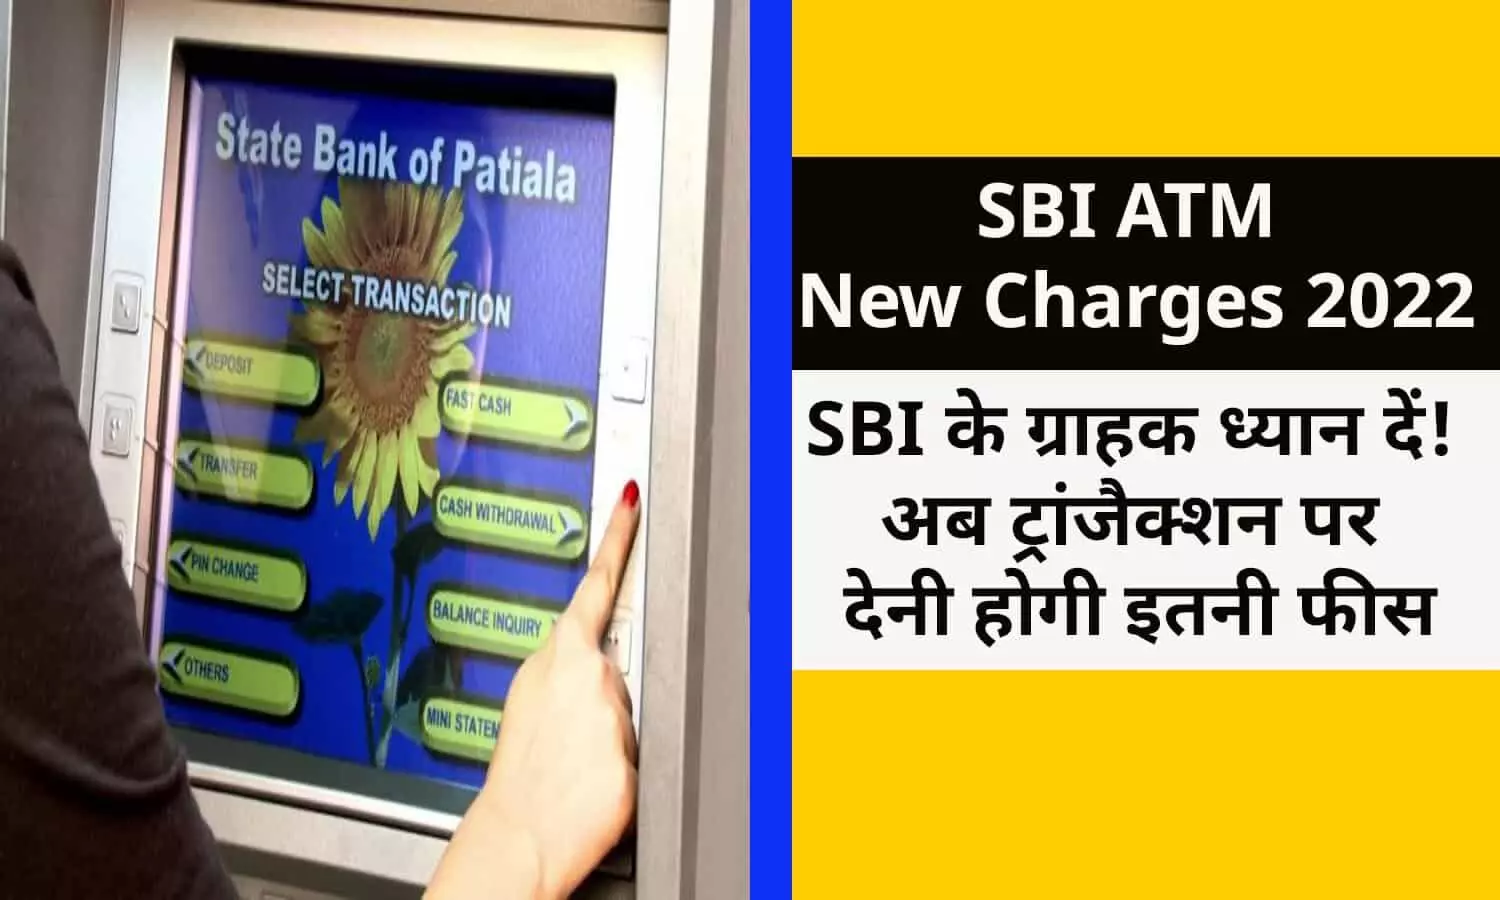 SBI ATM New Charges 2022